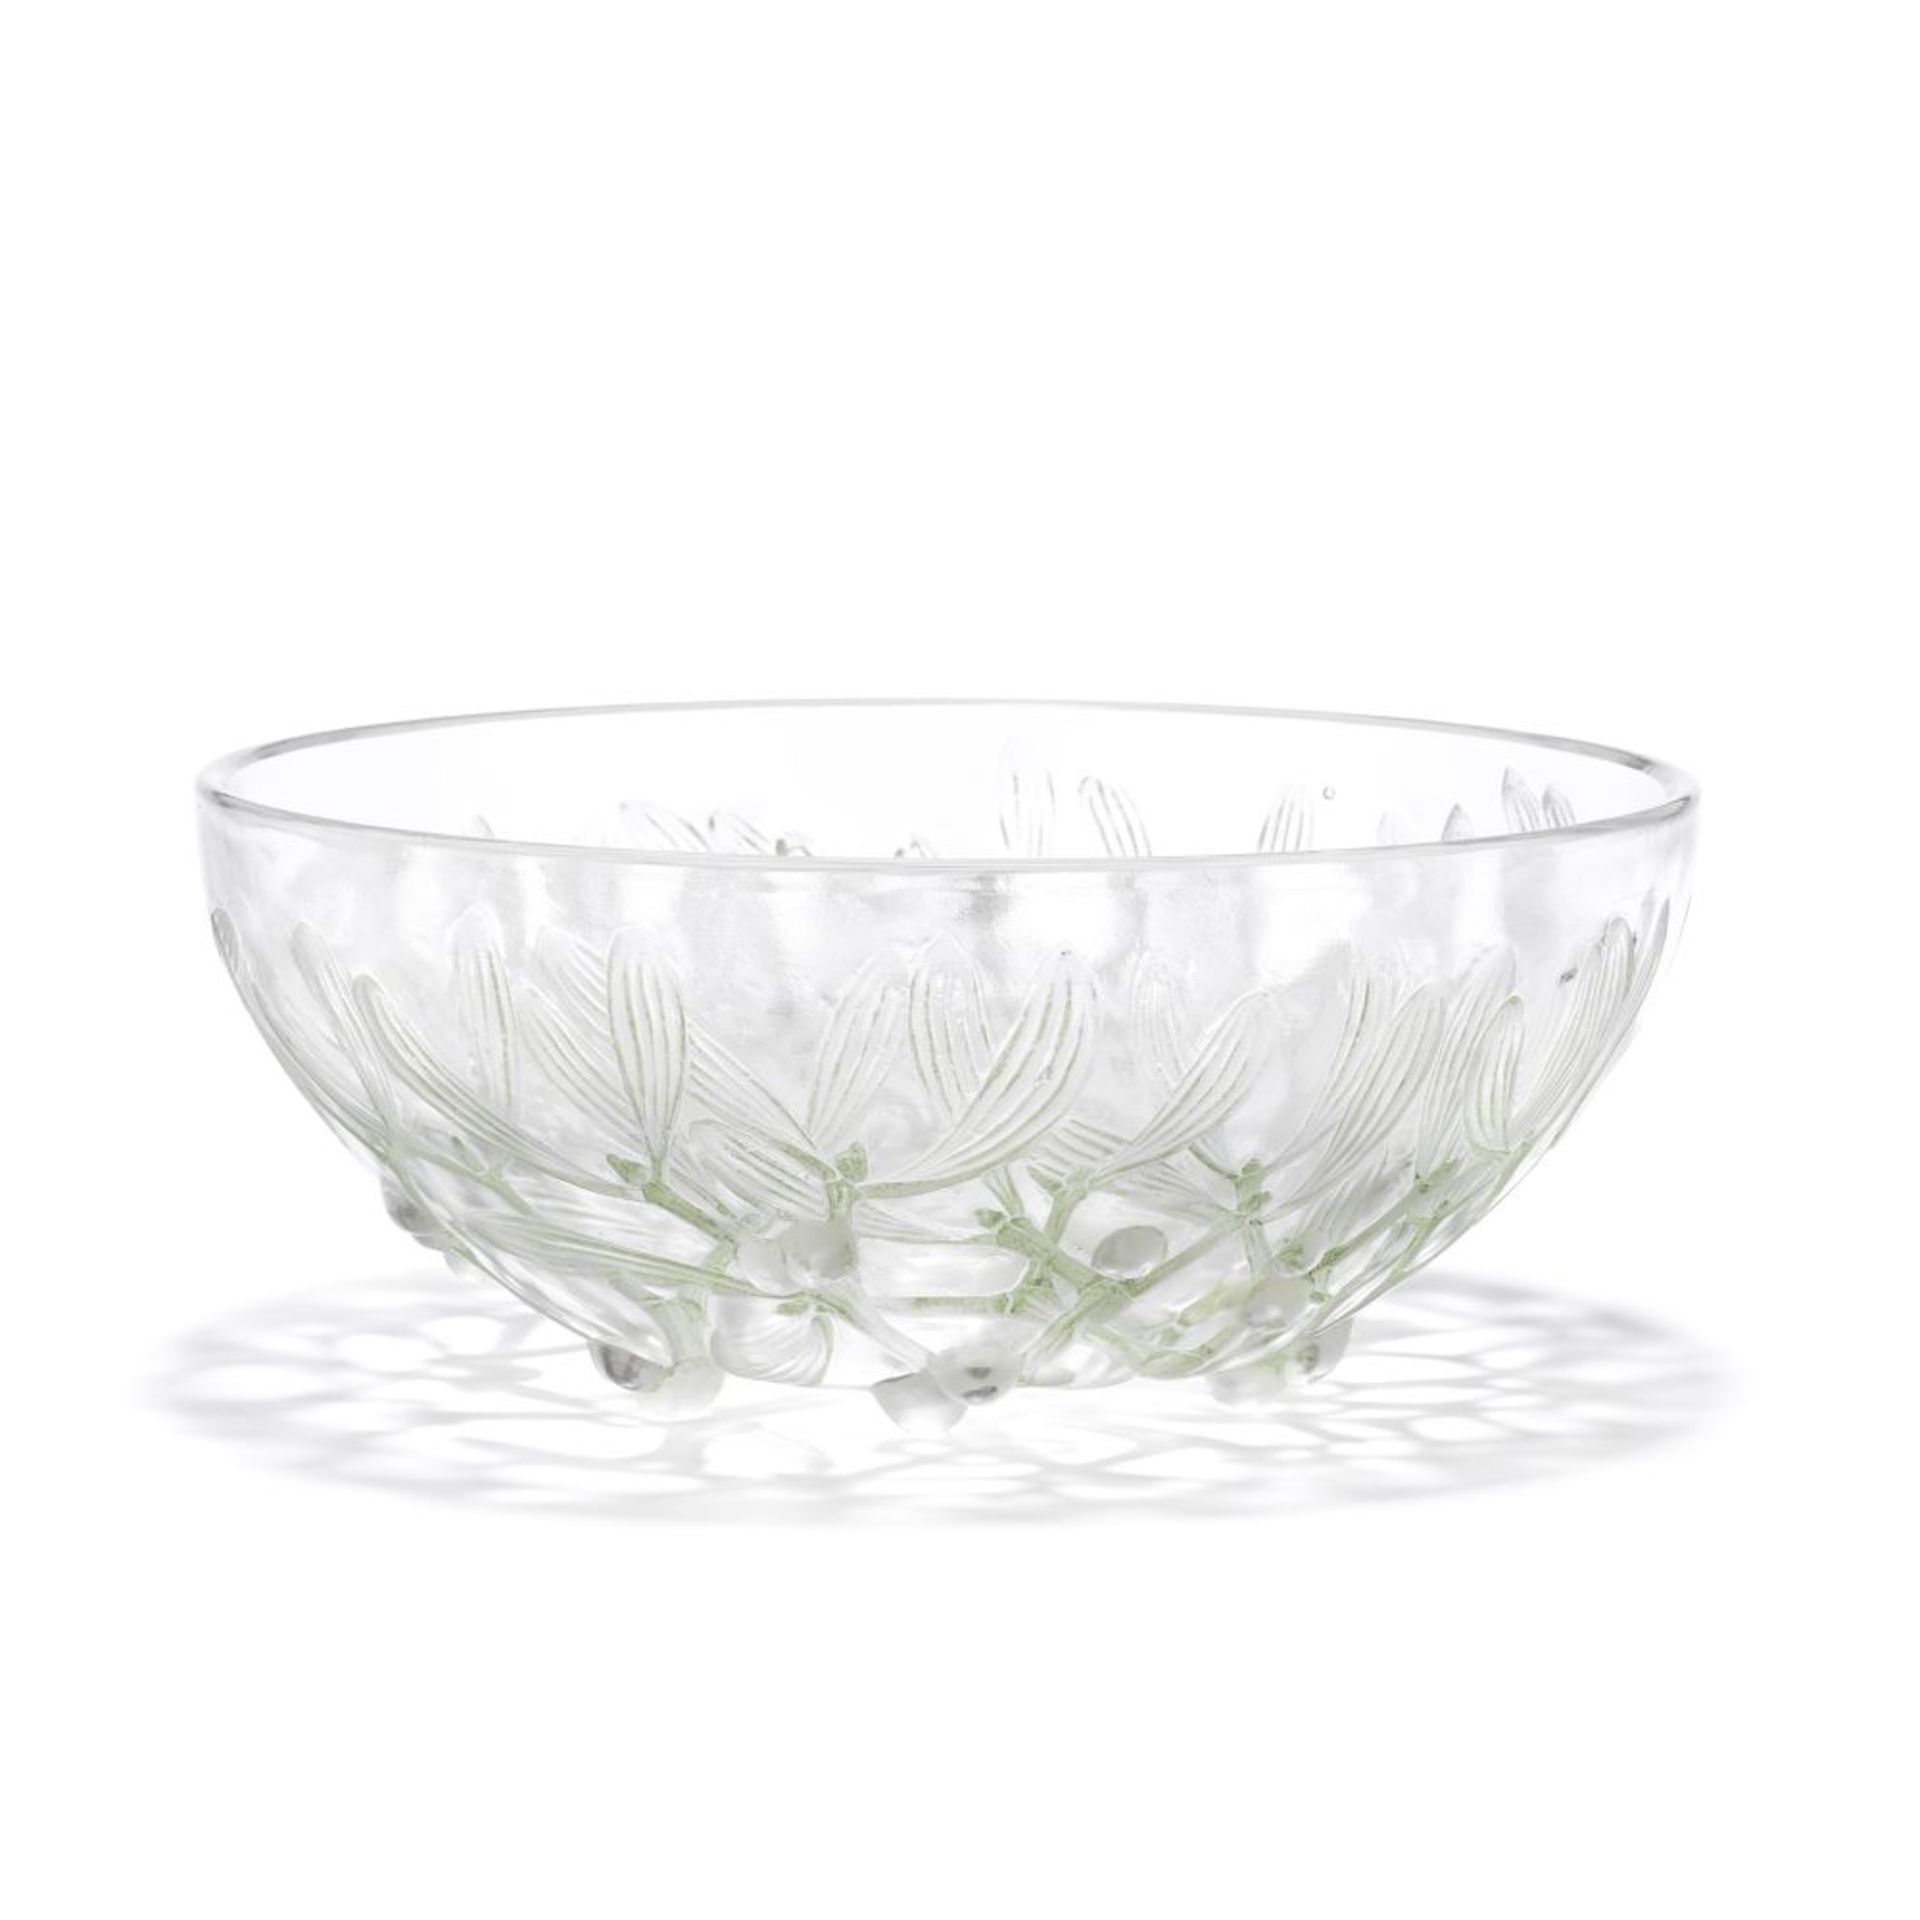 Ren&#233; Lalique Four bowls 'Jaffa', 'Gui' and 'Epis' and two beakers 'Hesperides', designed 192... - Bild 2 aus 6